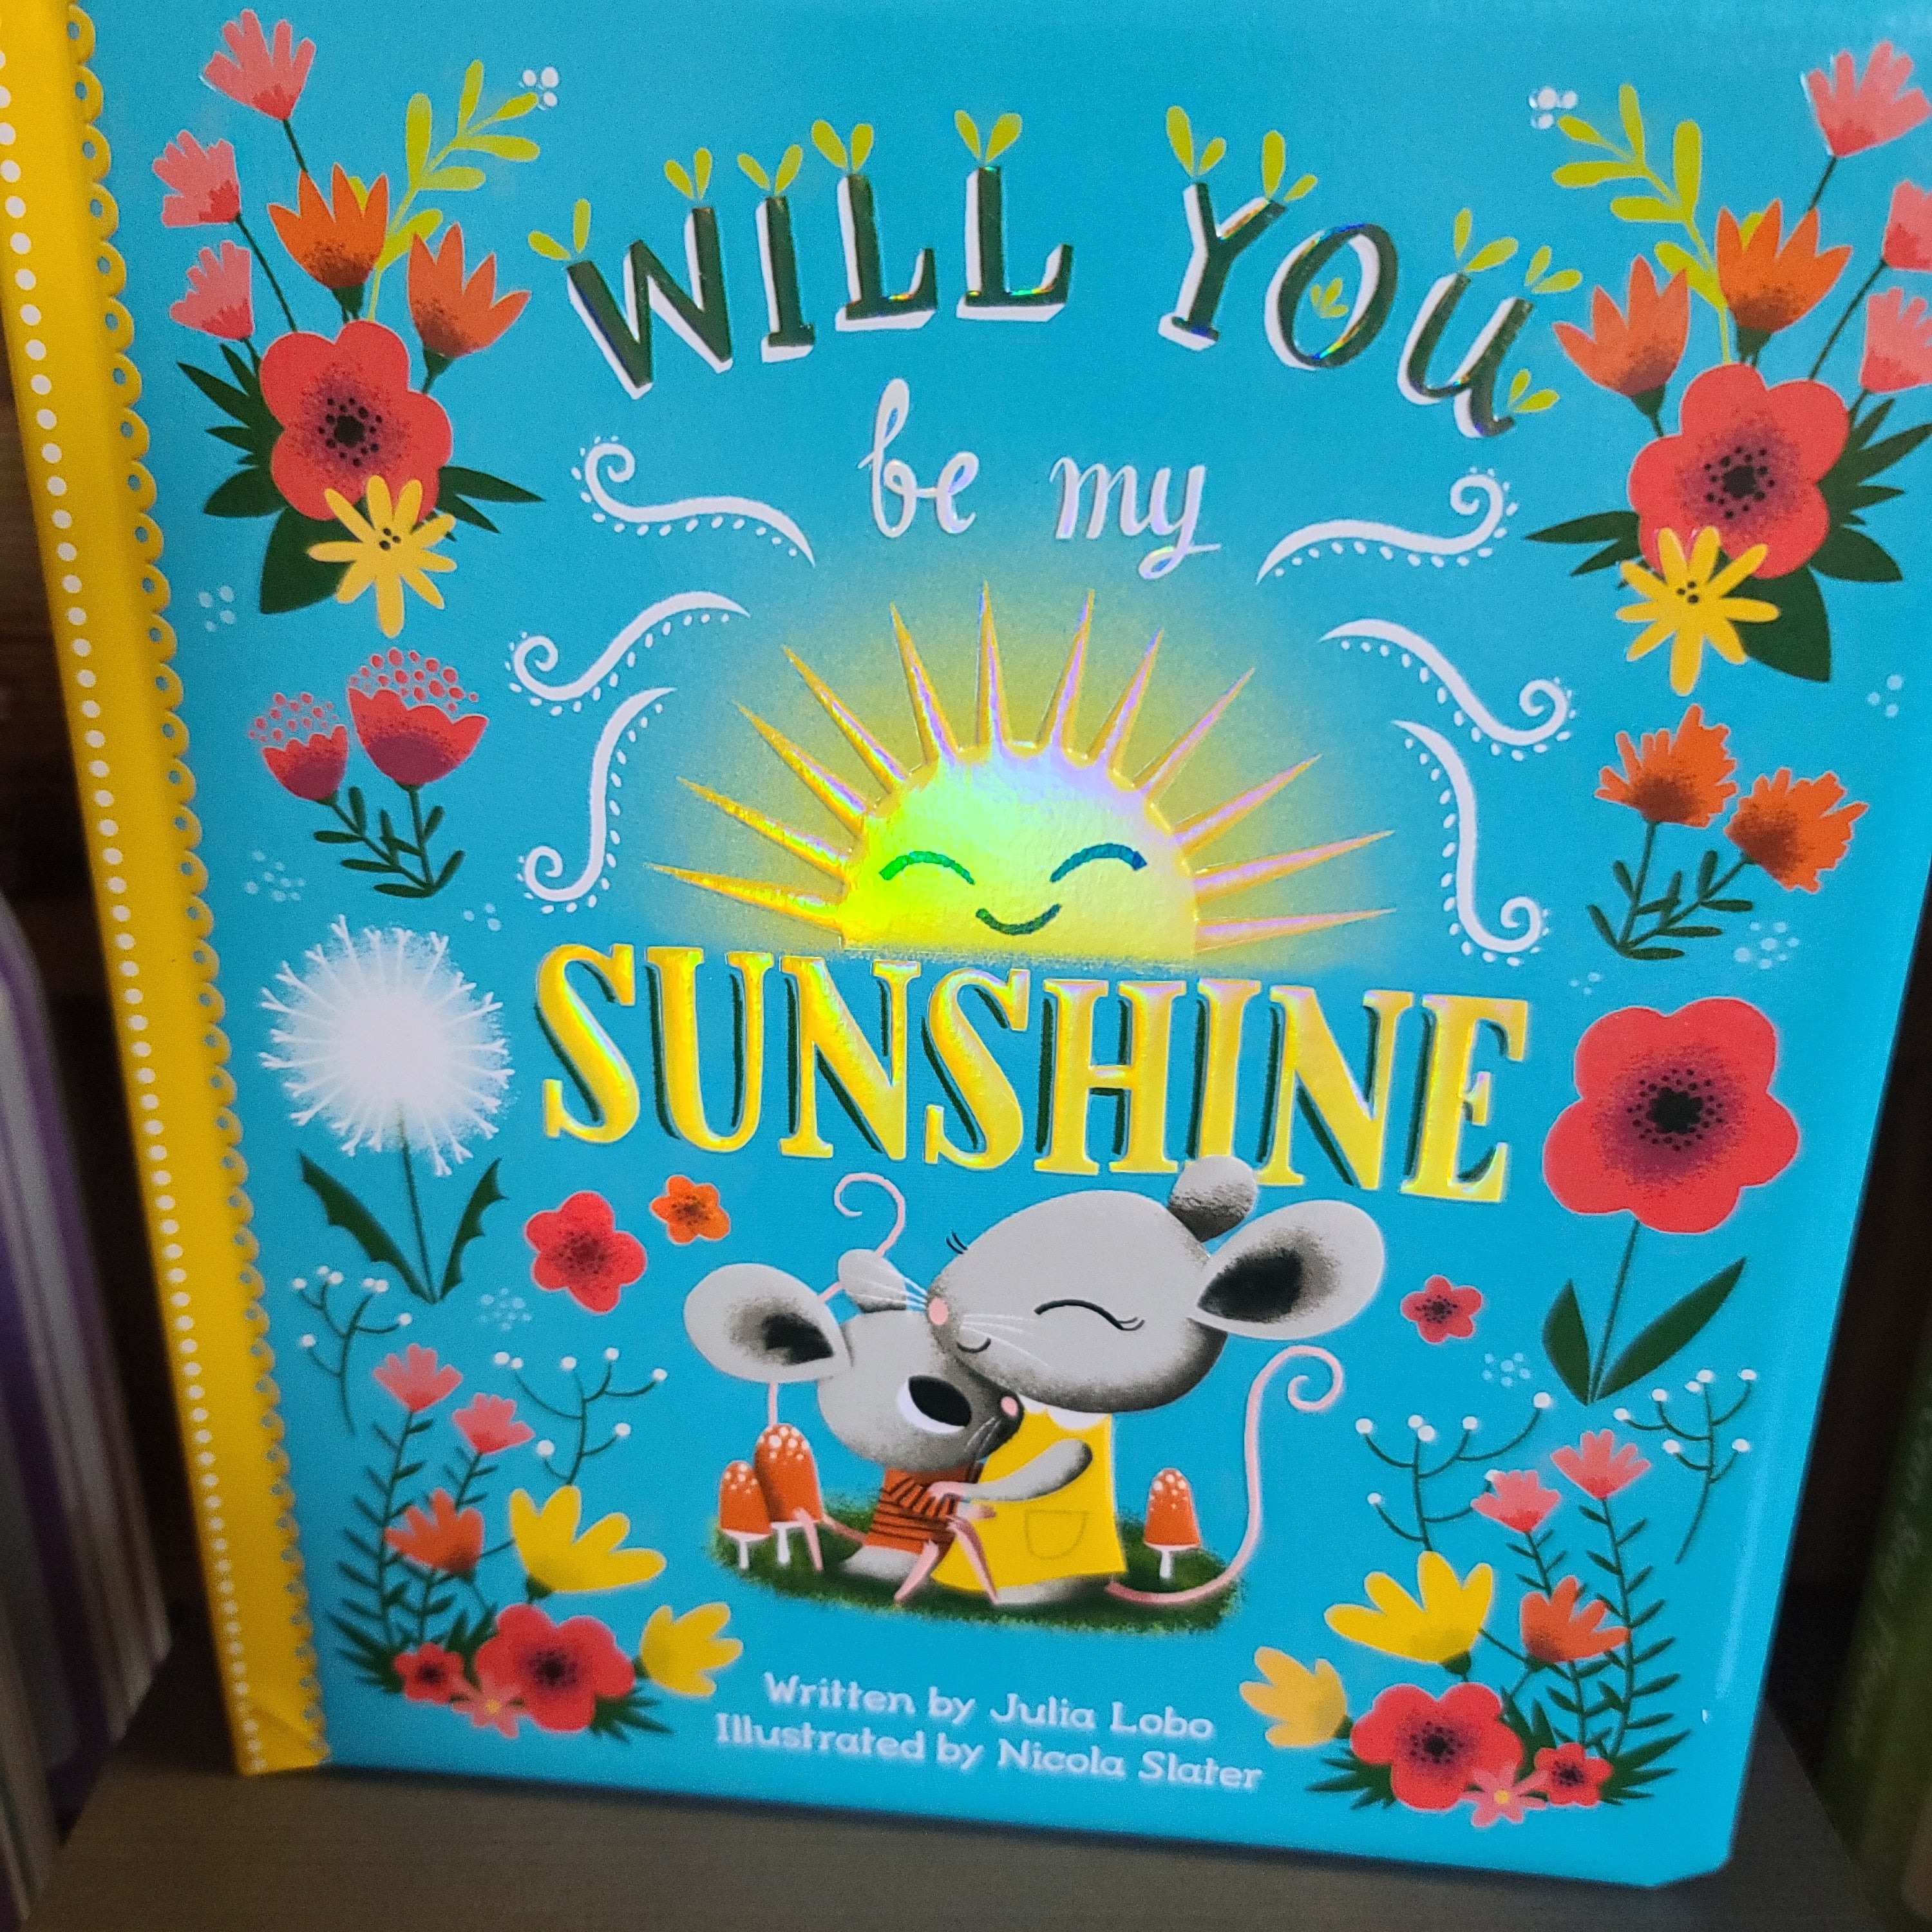 Will you be my sunshine book